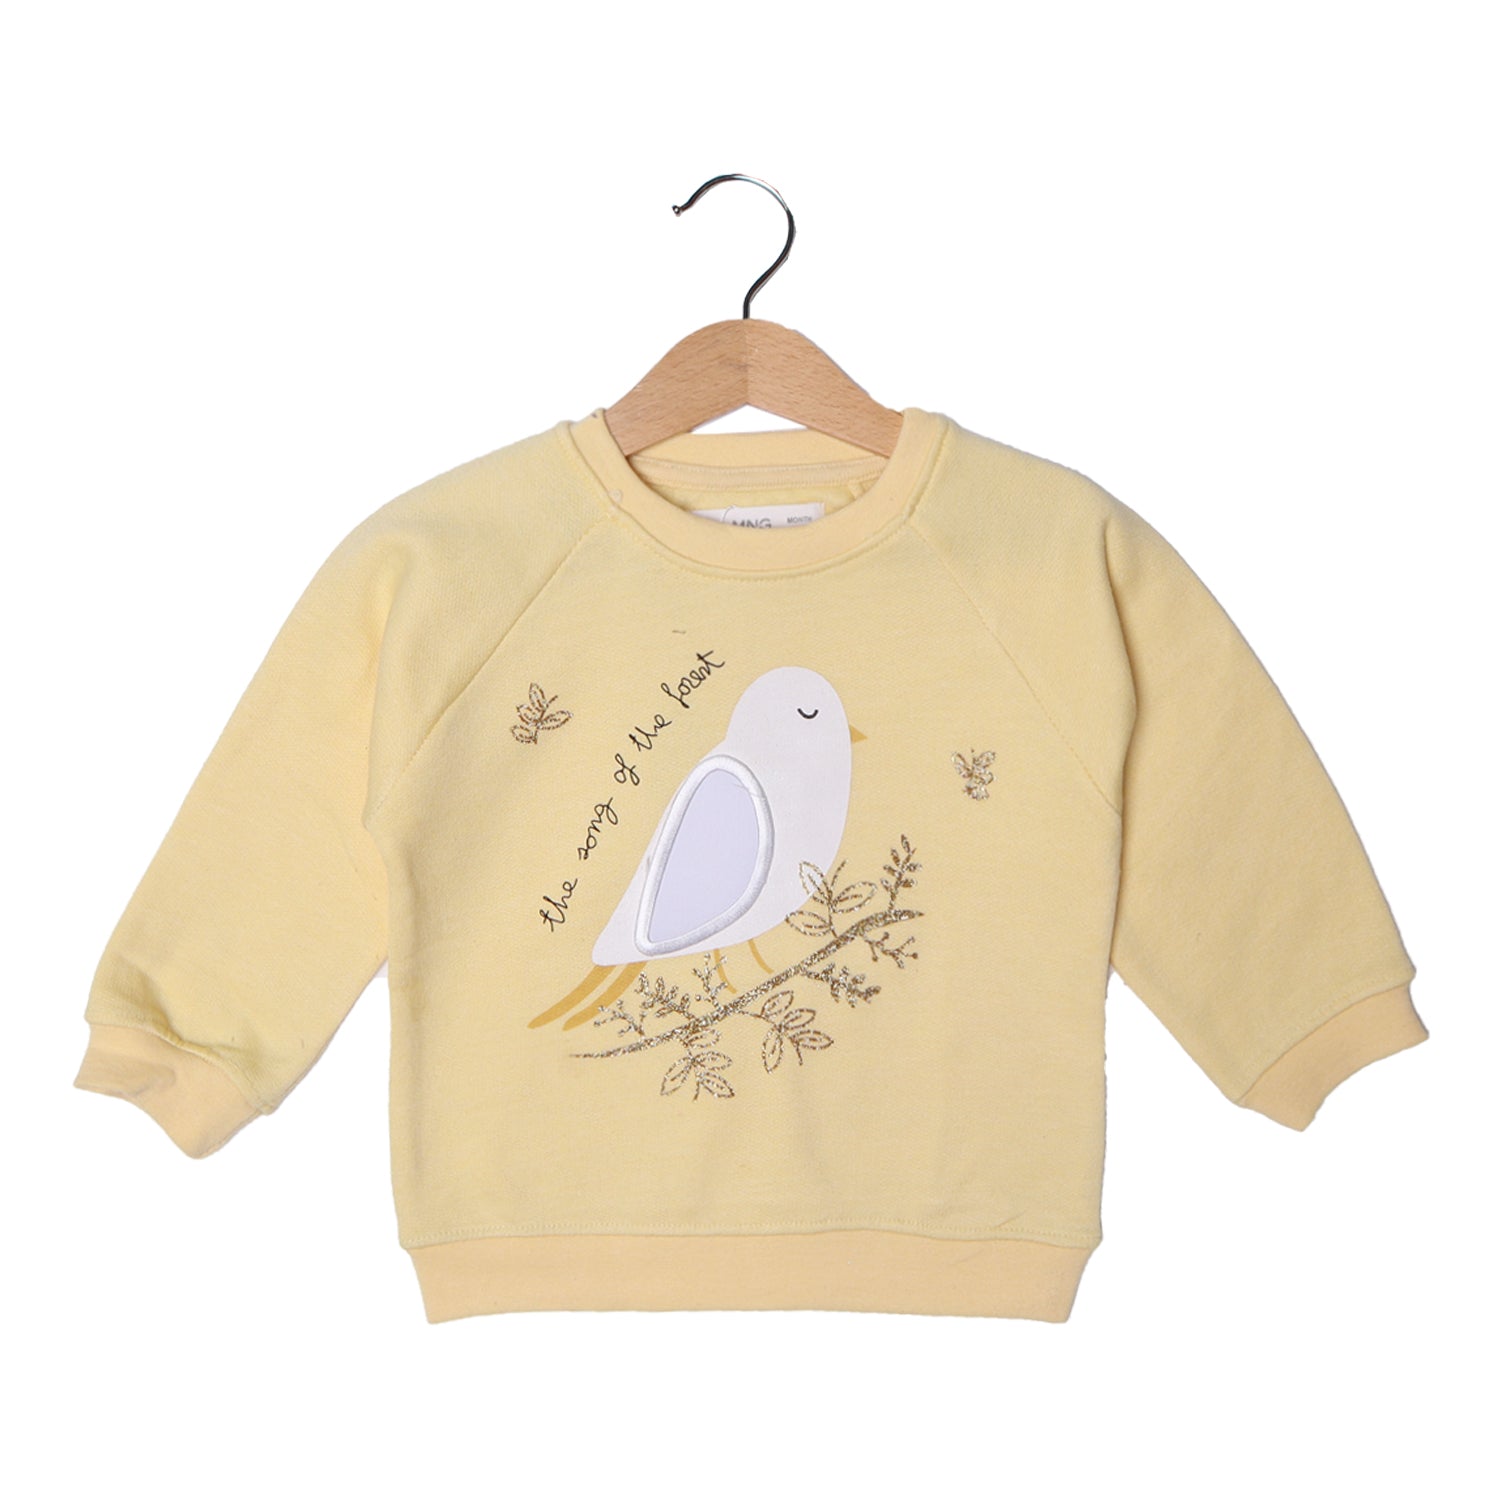 YELLOW BIRD WITH MOVING WING PRINTED SWEATSHIRT FOR GIRLS